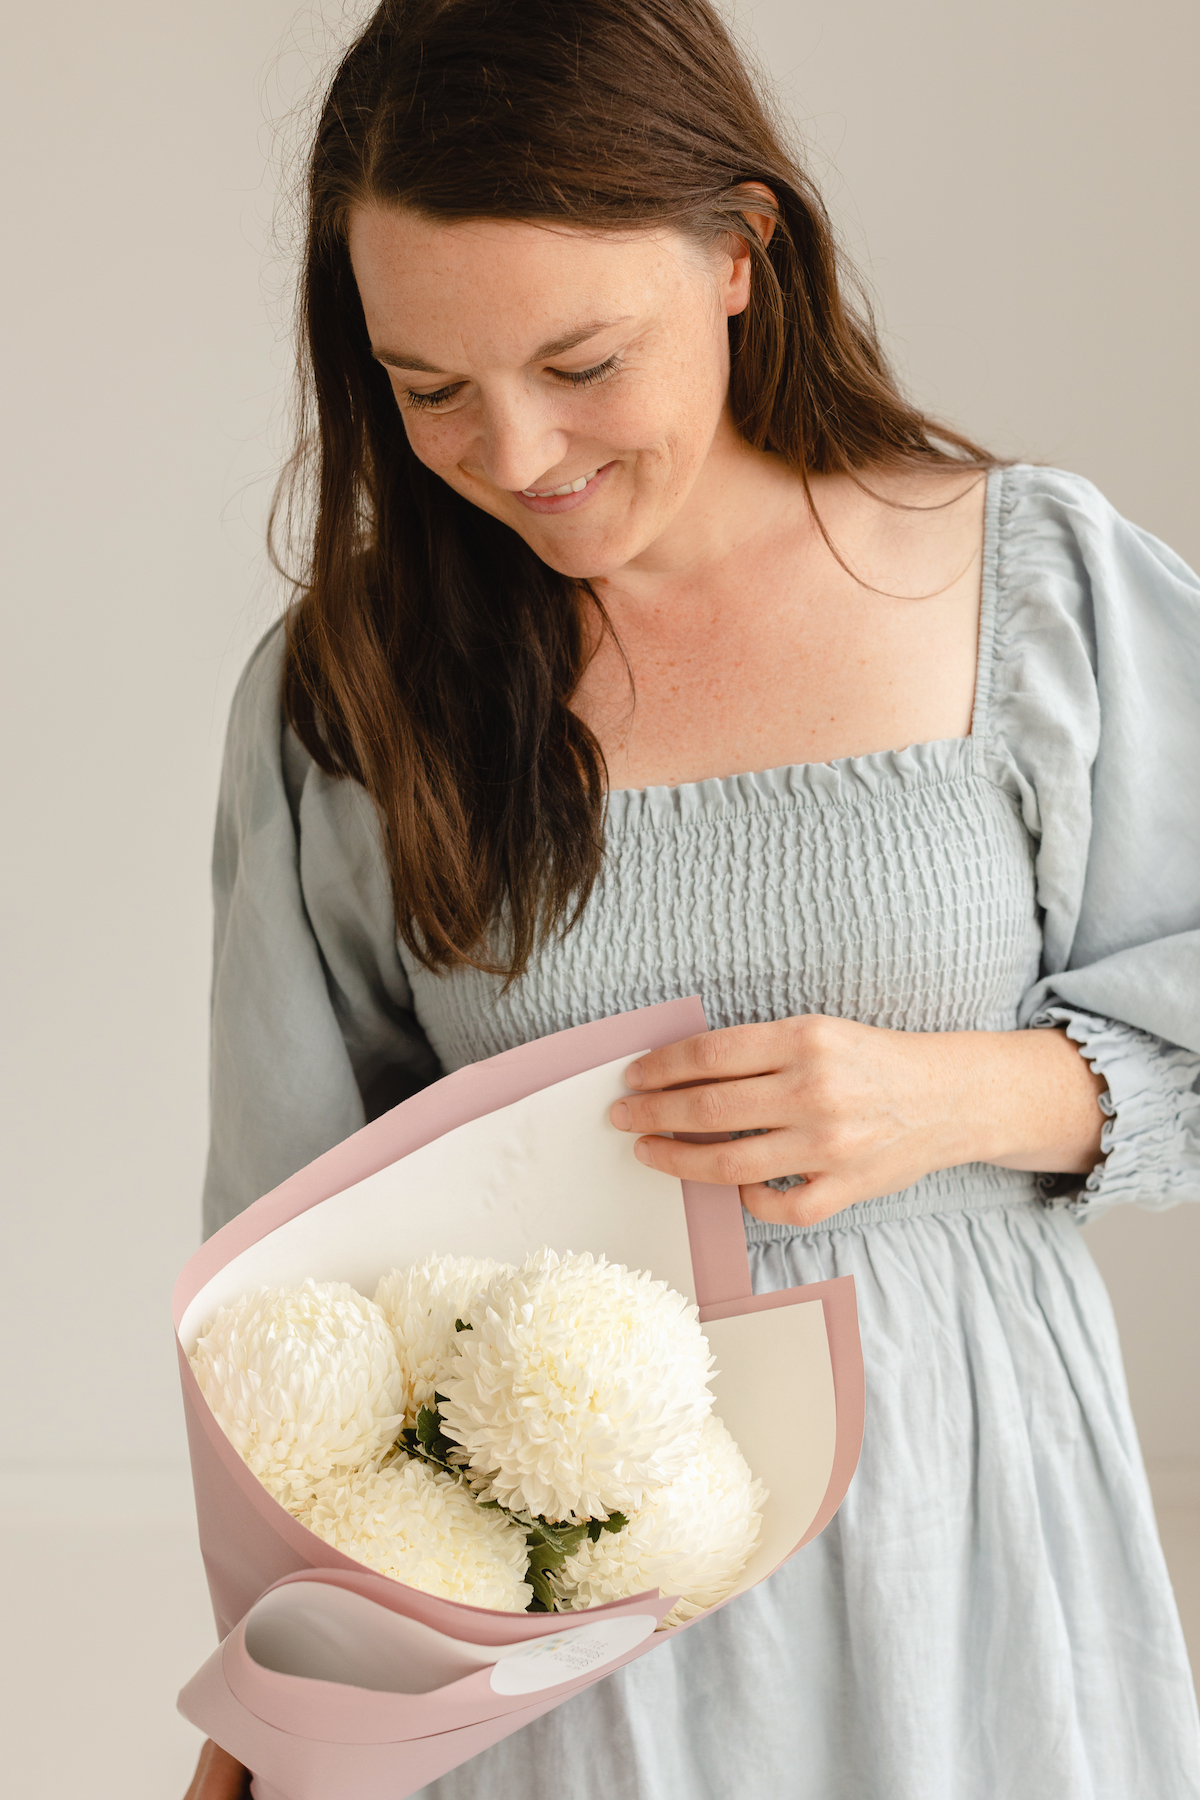 Bouquet of 5 white chrysanthemums being held by a woman for Mothering Sunday.